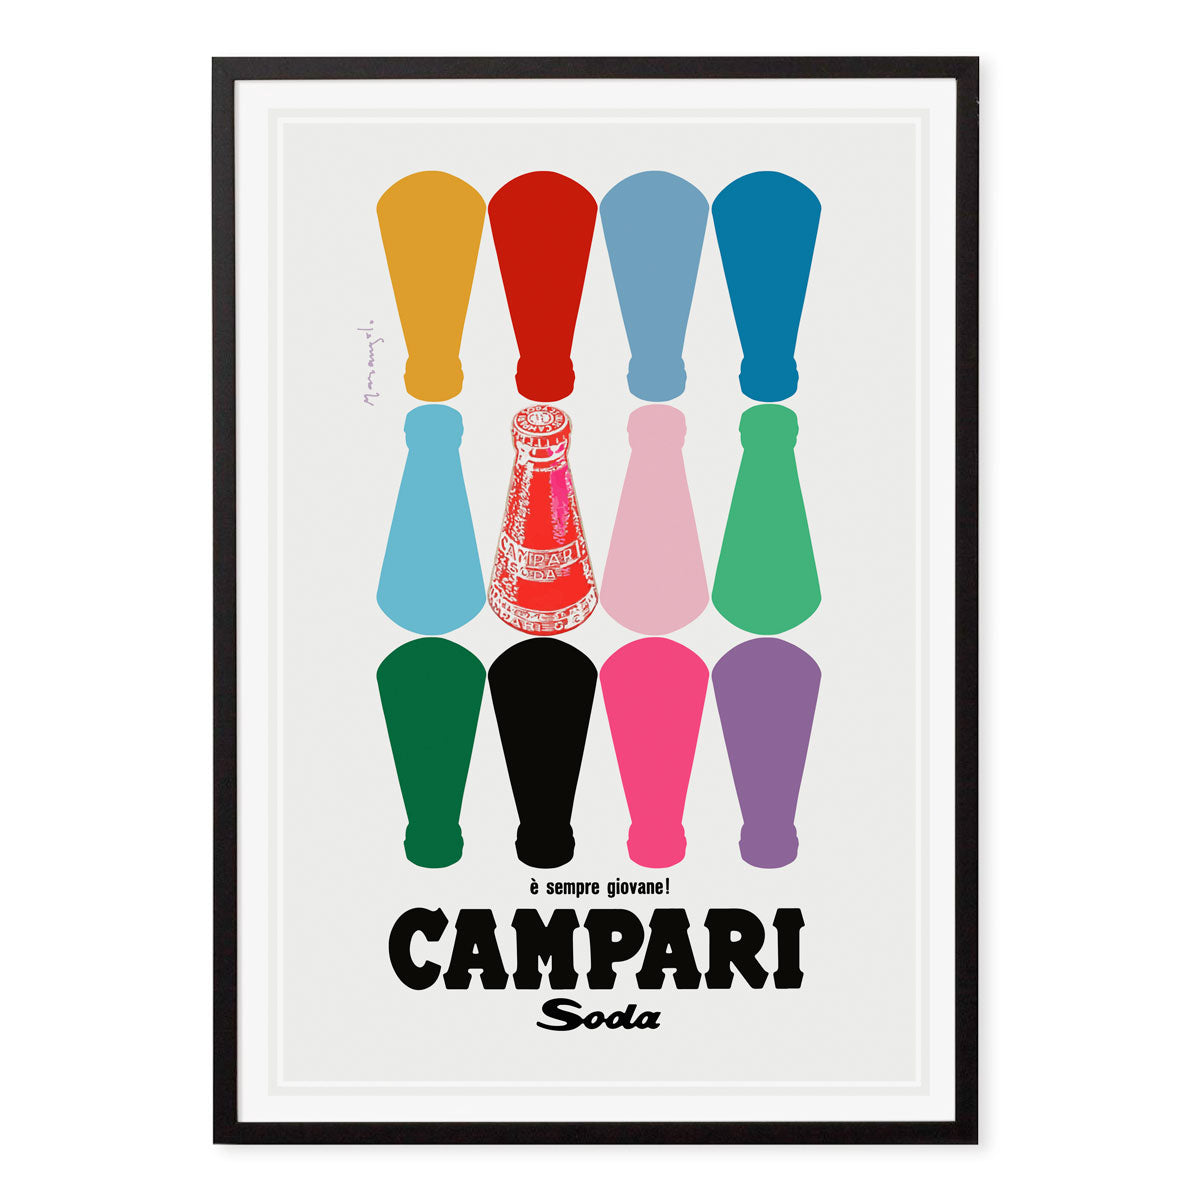 Campari Soda #2 vintage retro advertising poster print in black frame from Places We Luv